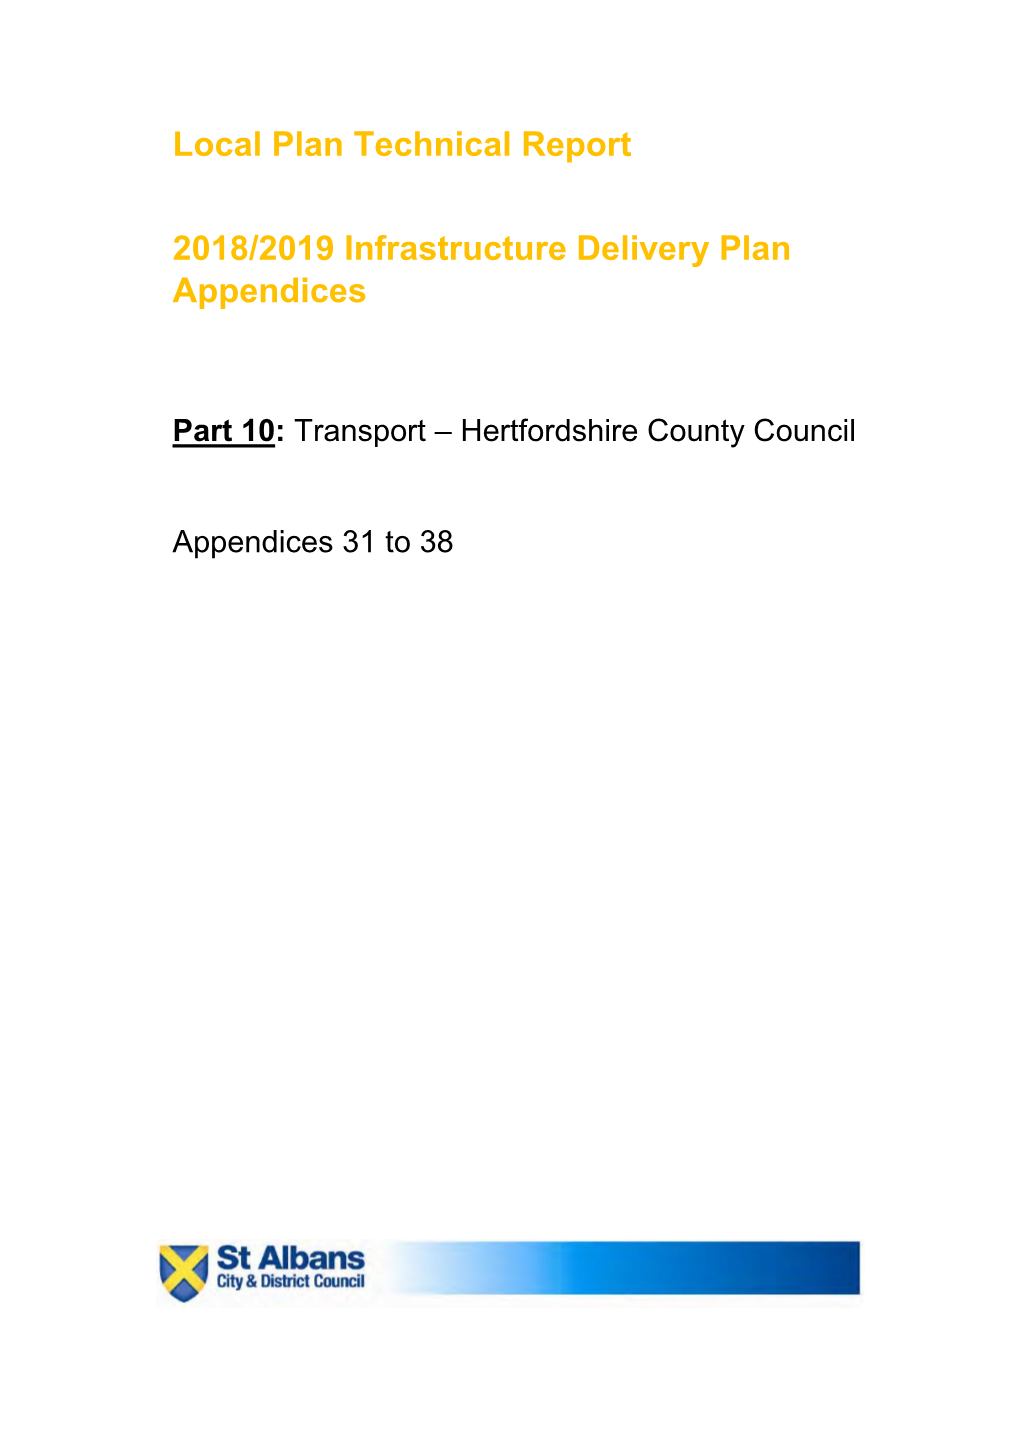 Local Plan Technical Report 2018/2019 Infrastructure Delivery